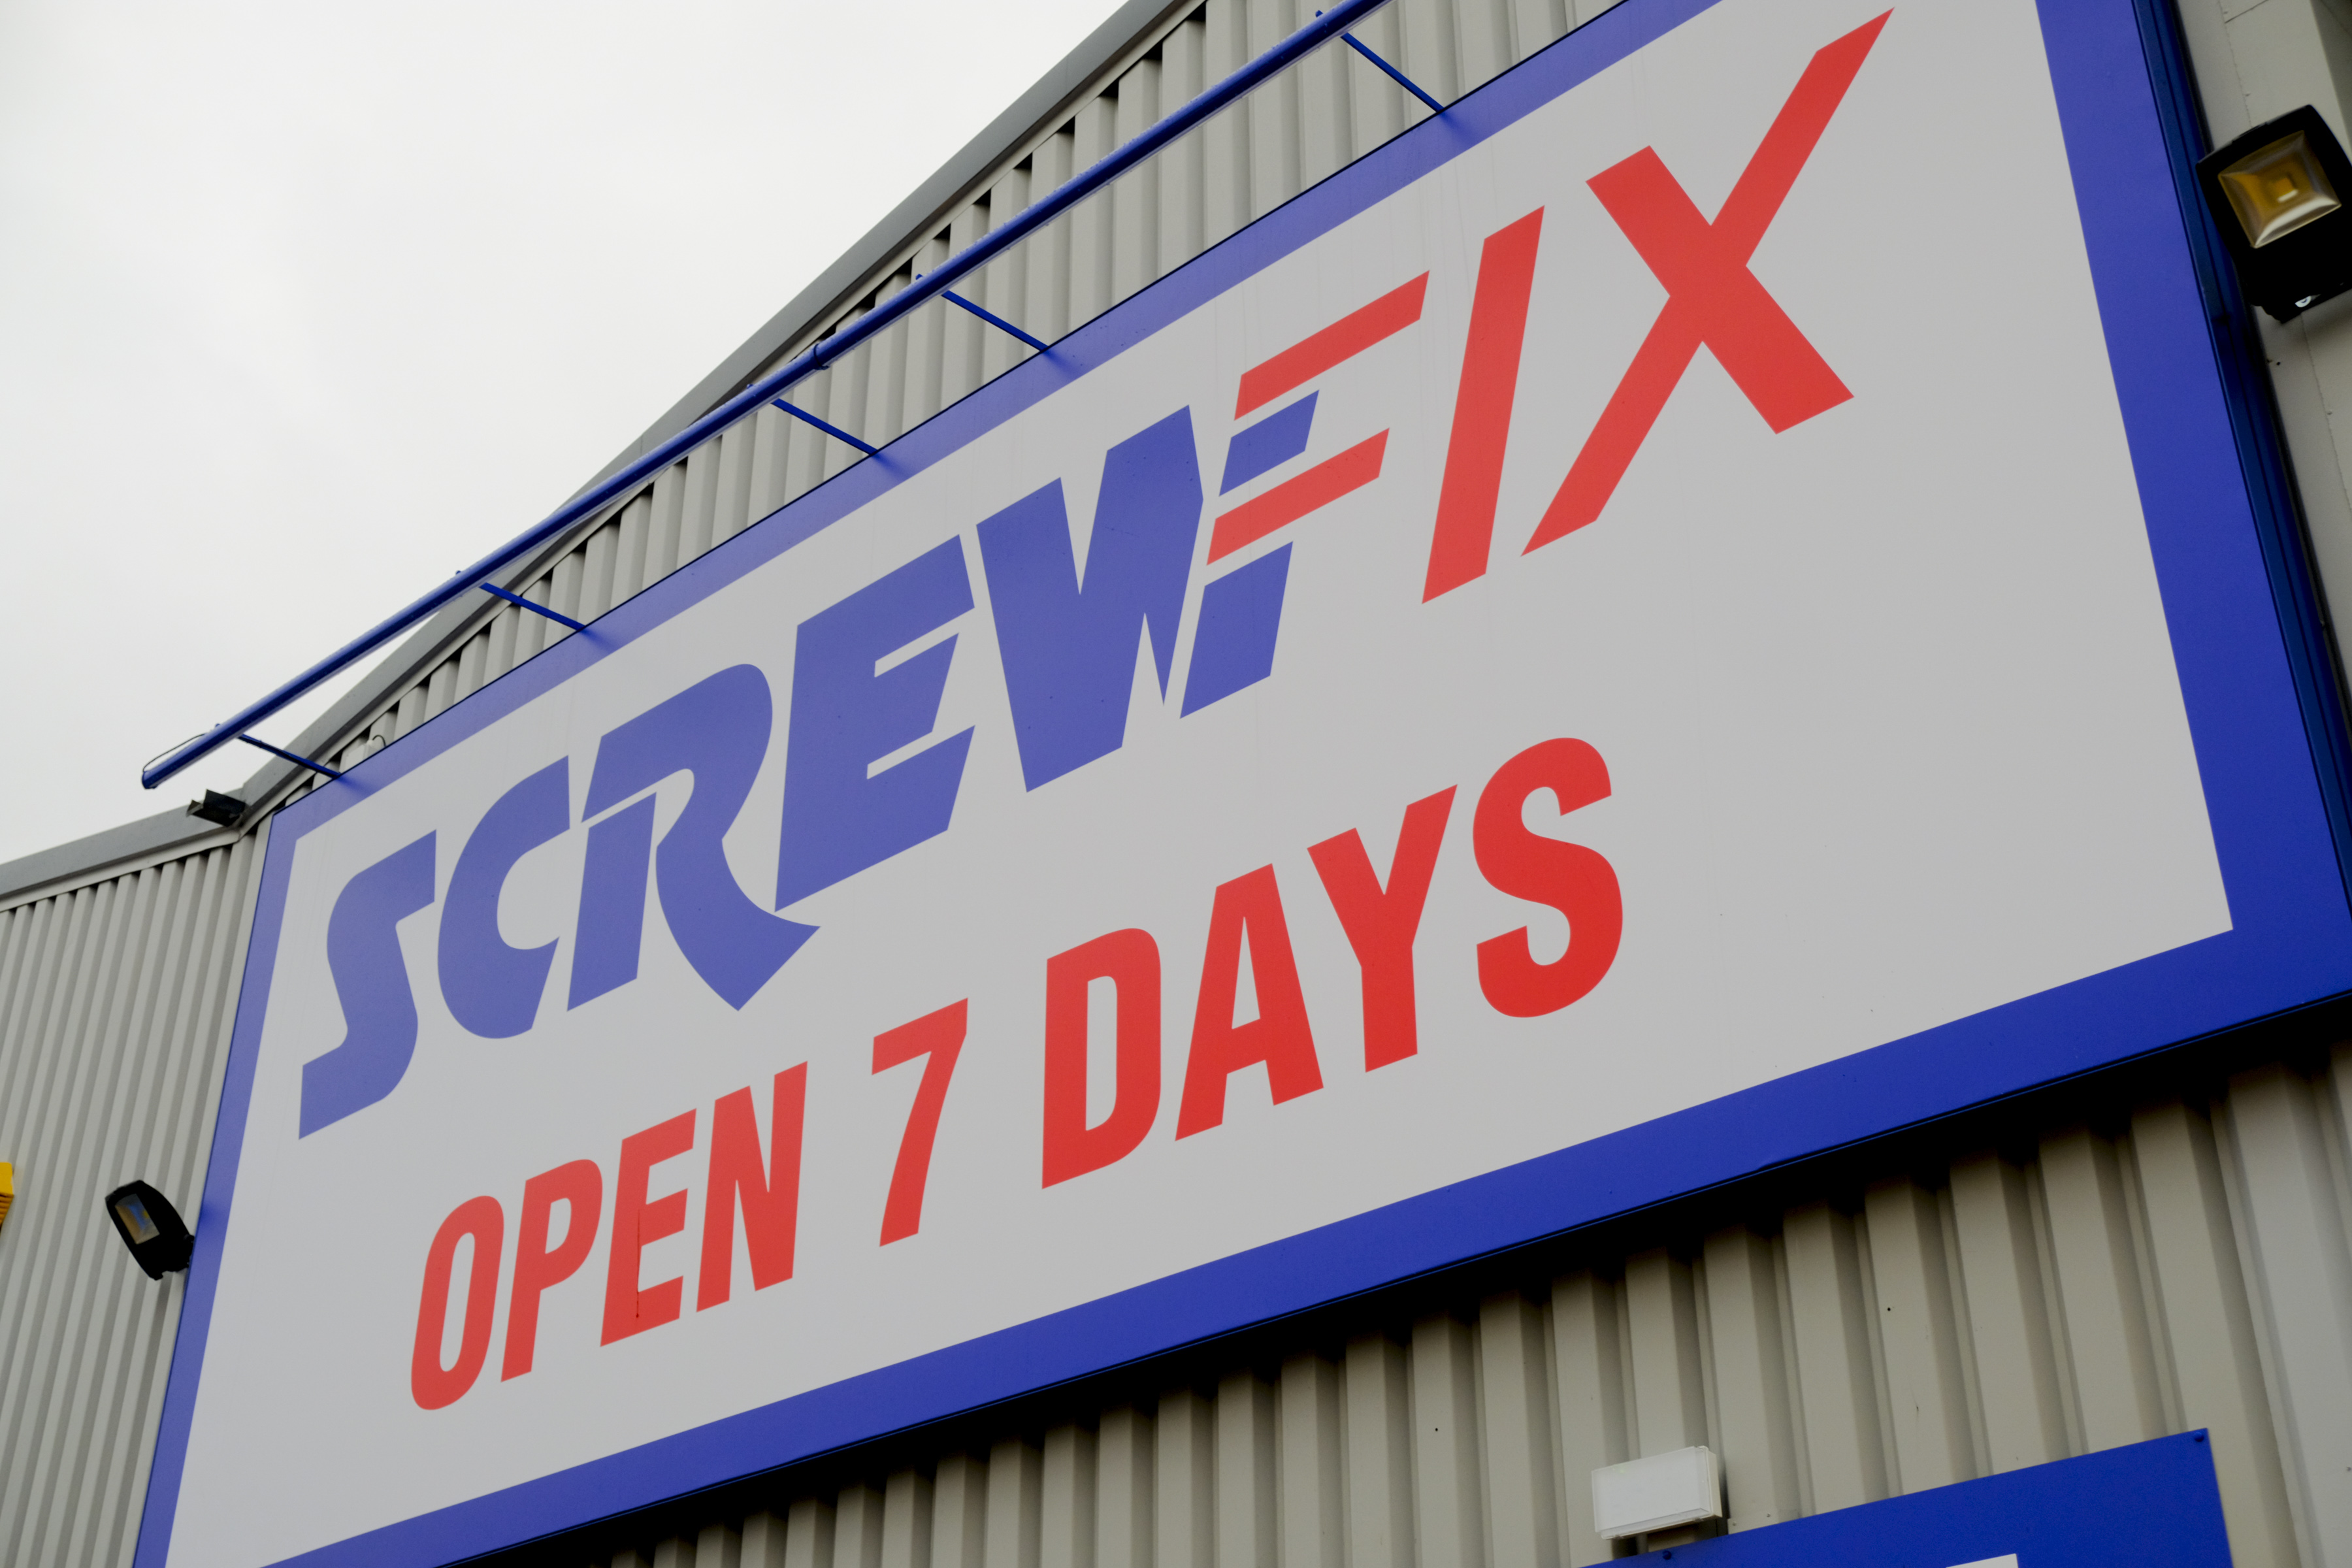 Job boost for Norwich as new Screwfix store opens